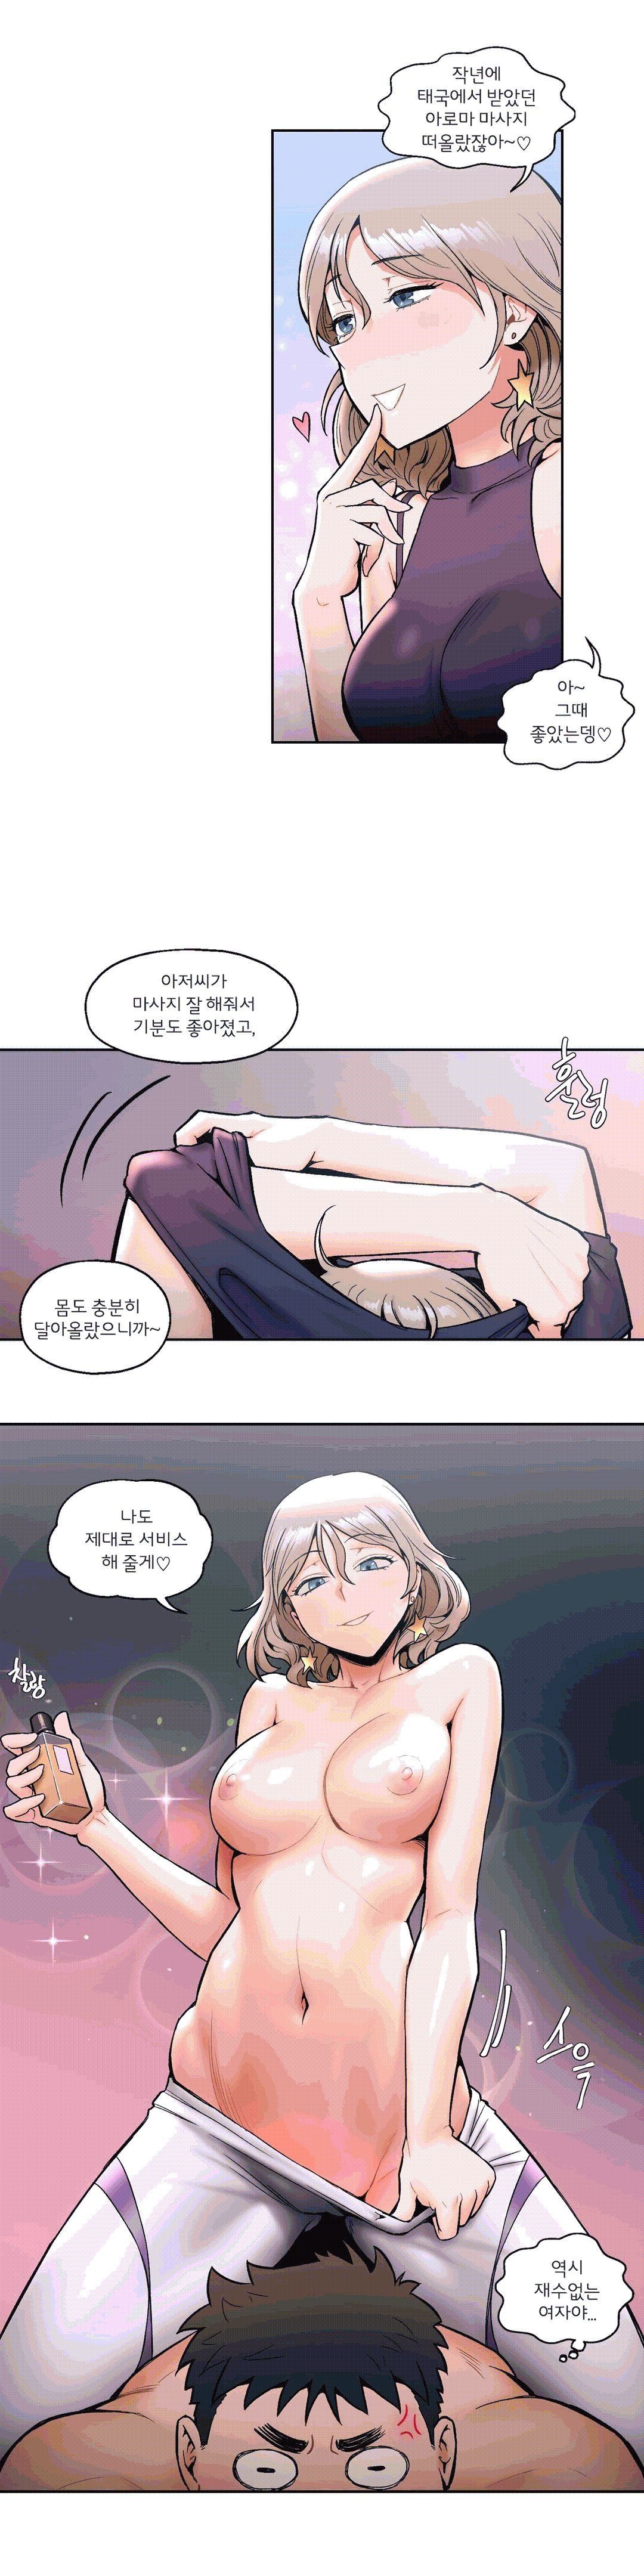 Sex Exercice Season 02 Raw - Chapter 16 Page 4